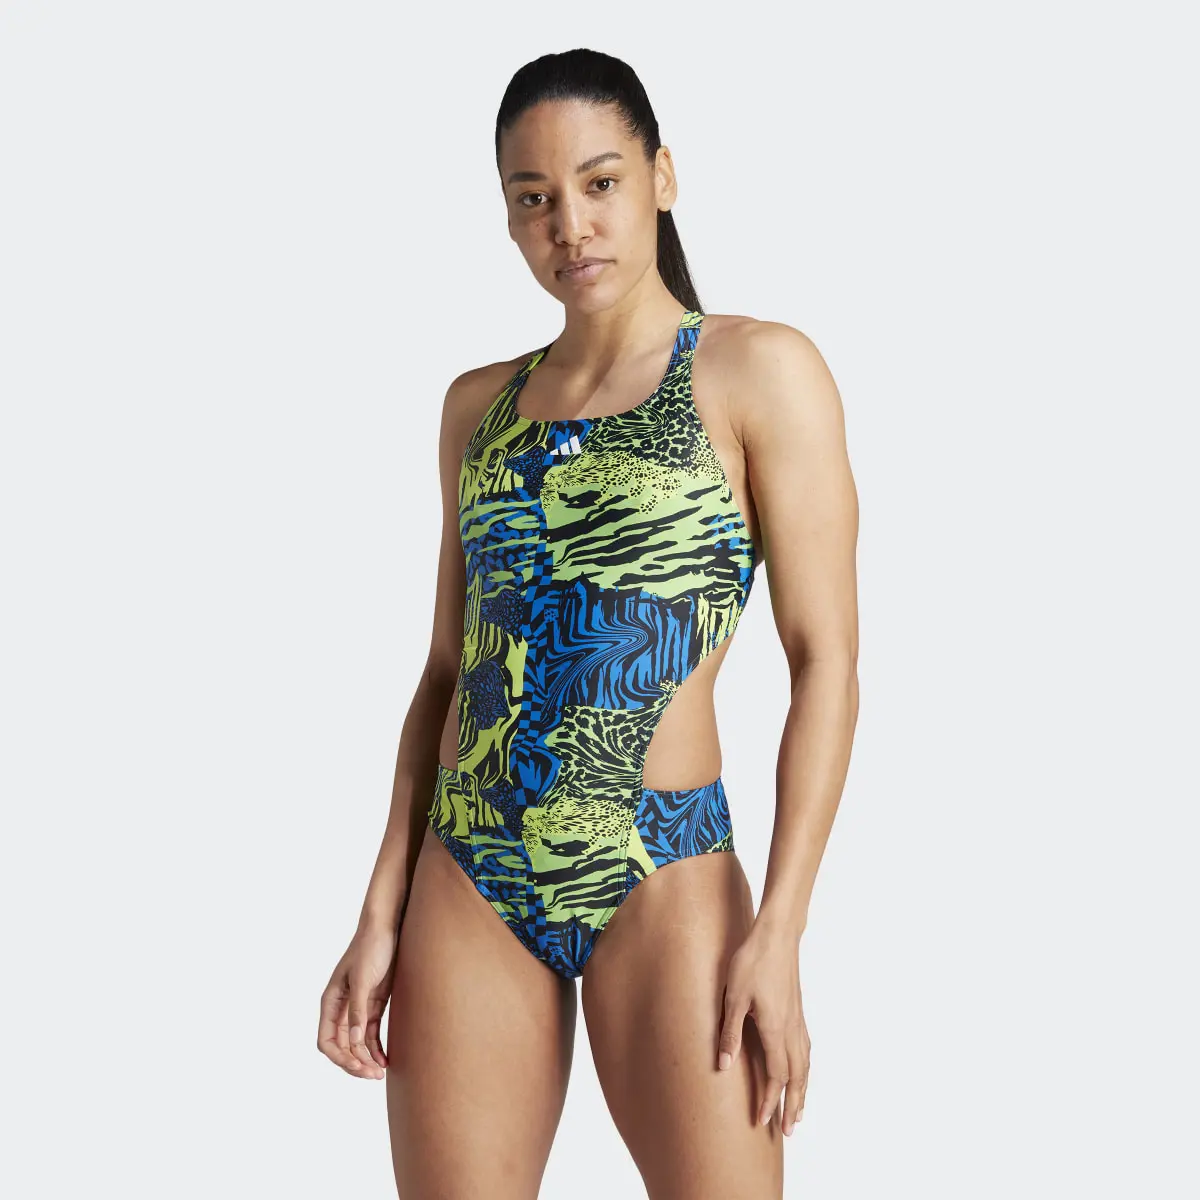 Adidas Allover Graphic Swimsuit. 2